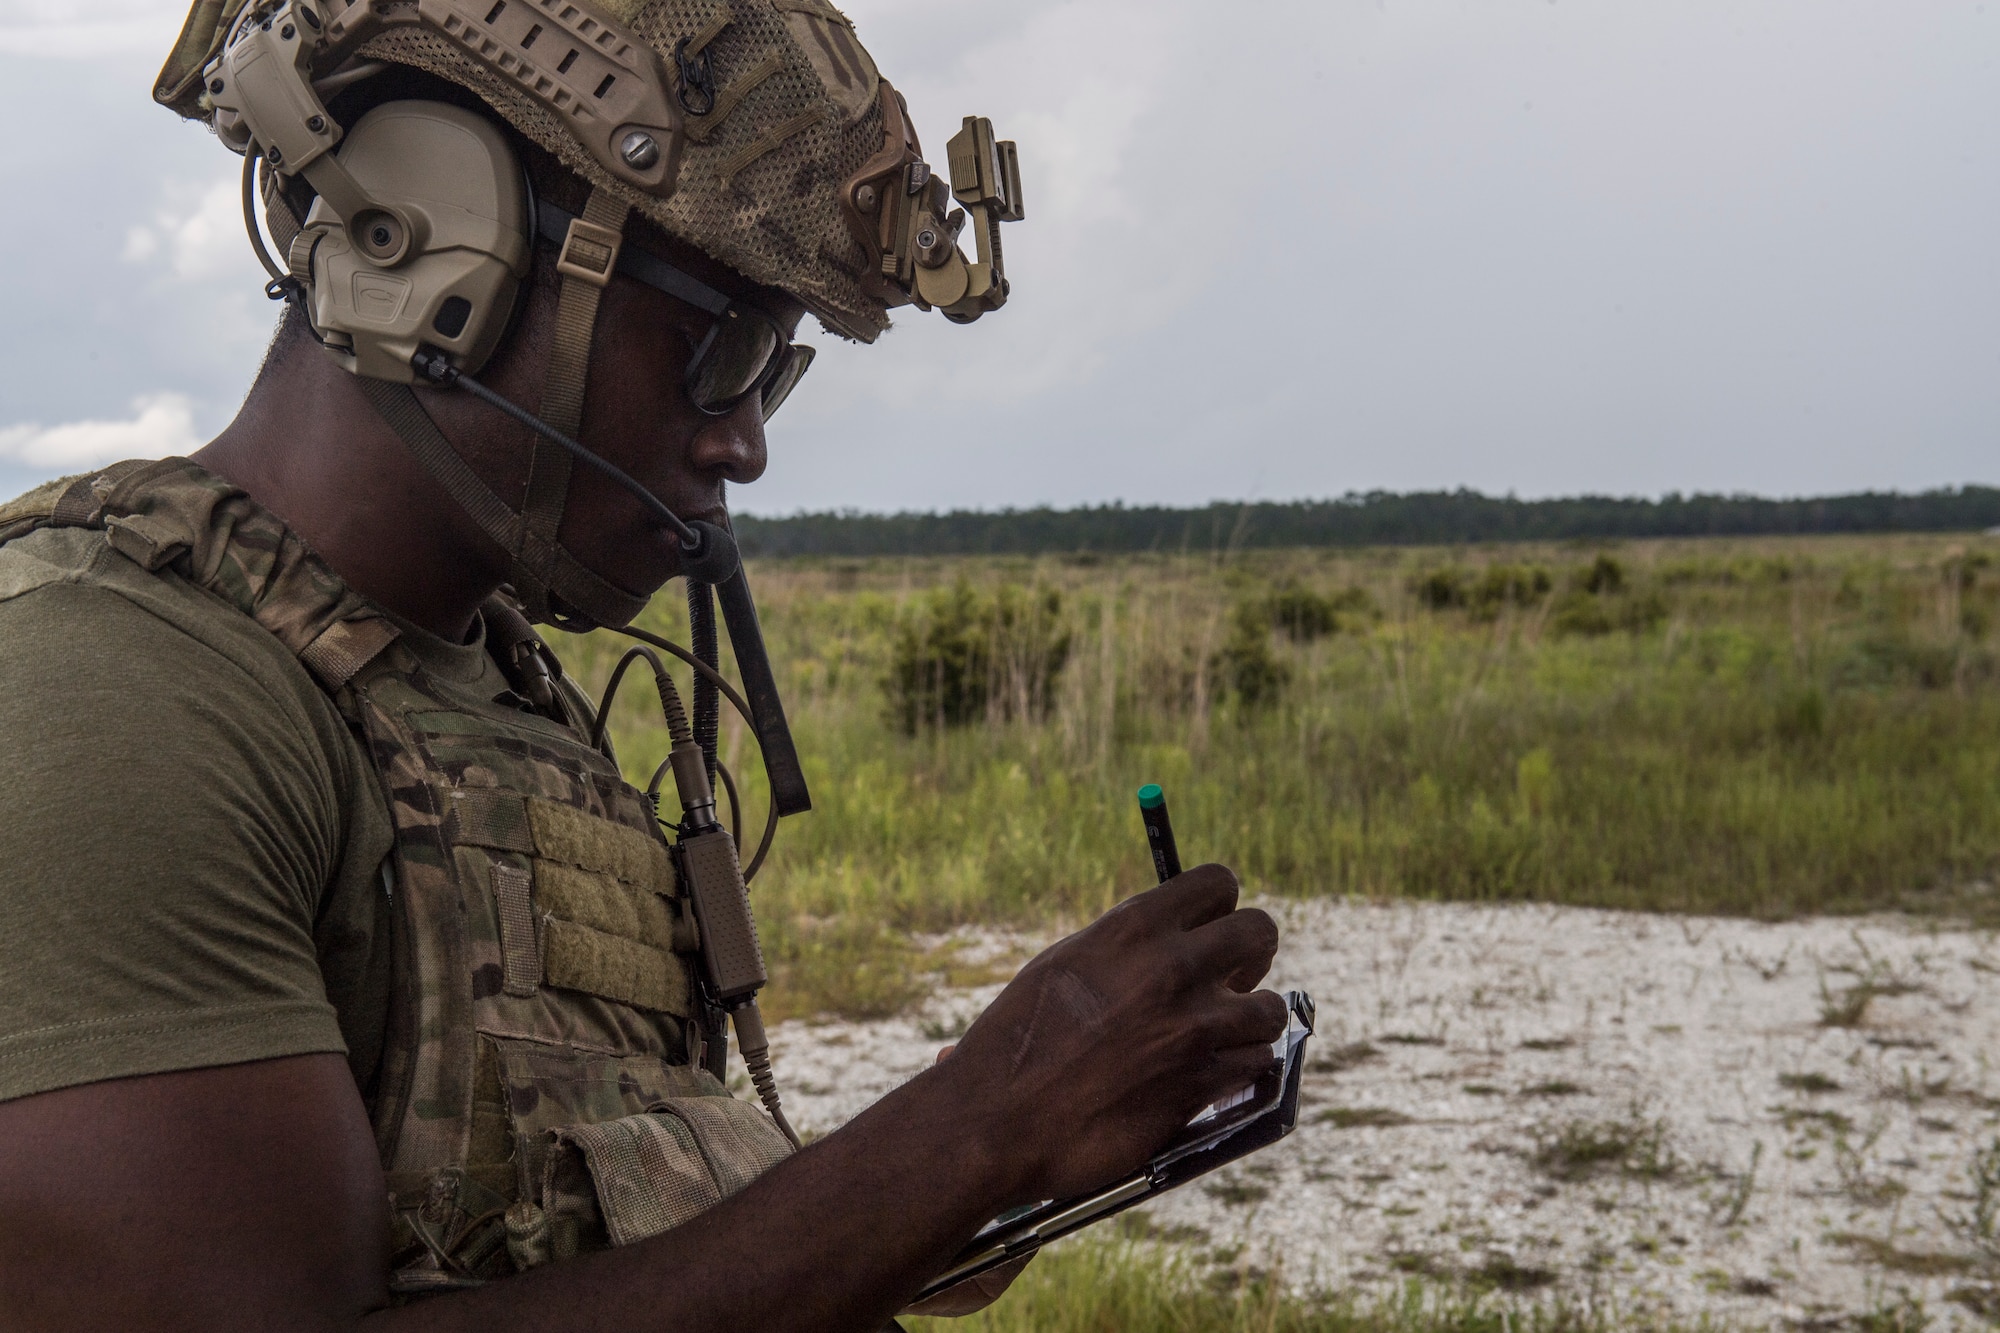 A special operations troop uses a stylus to update his handheld tablet device with sand and tall grass in the background.